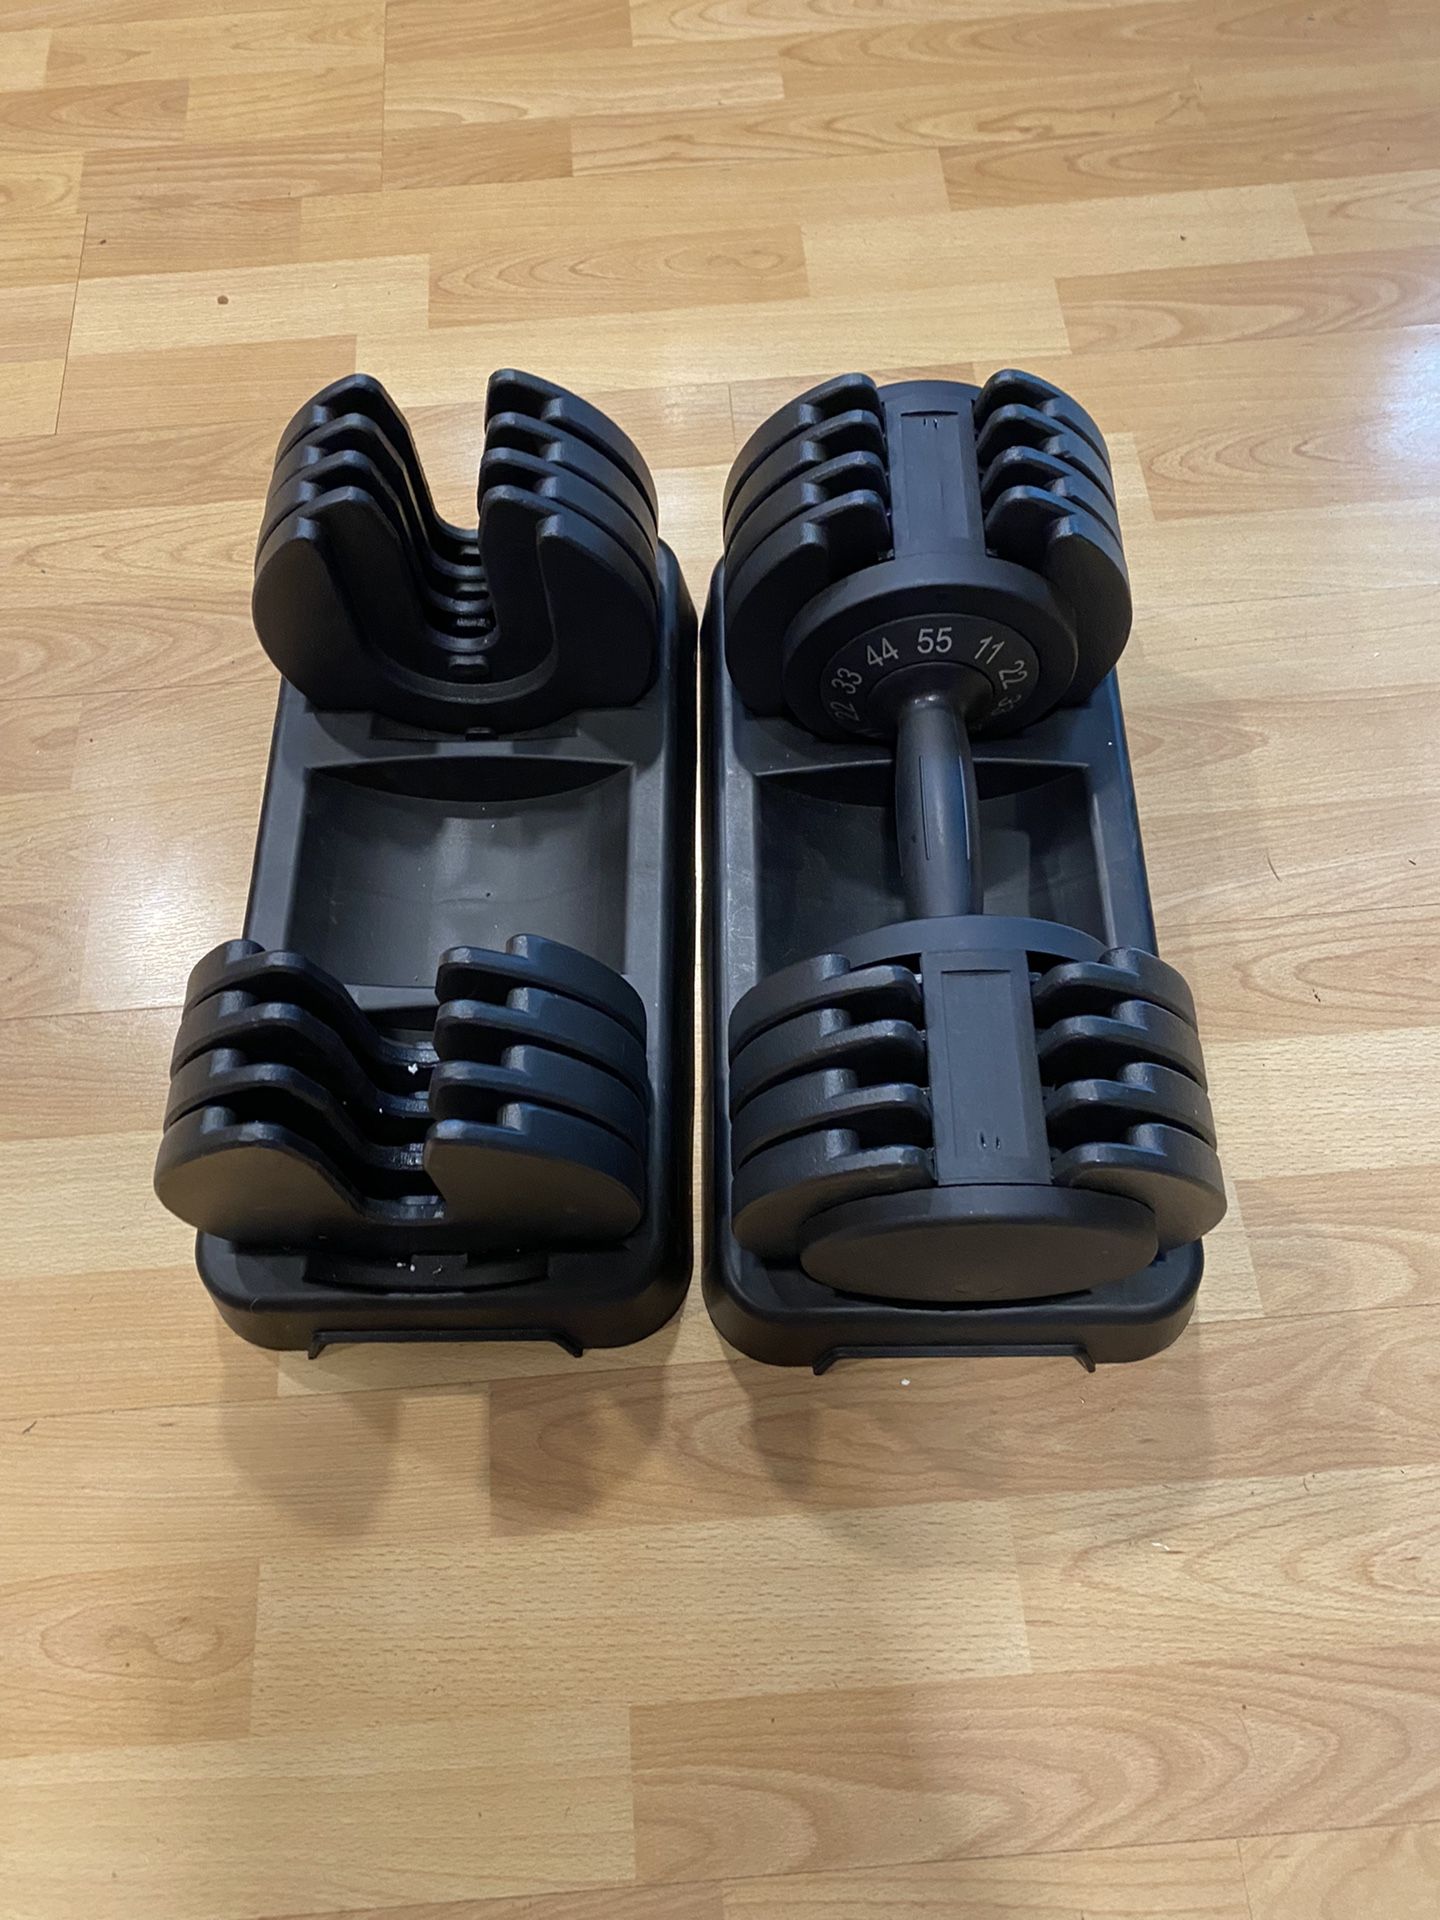 Adjustable 55lbs Max Dumbbell Set - Only 1 Handle - Steel Plated